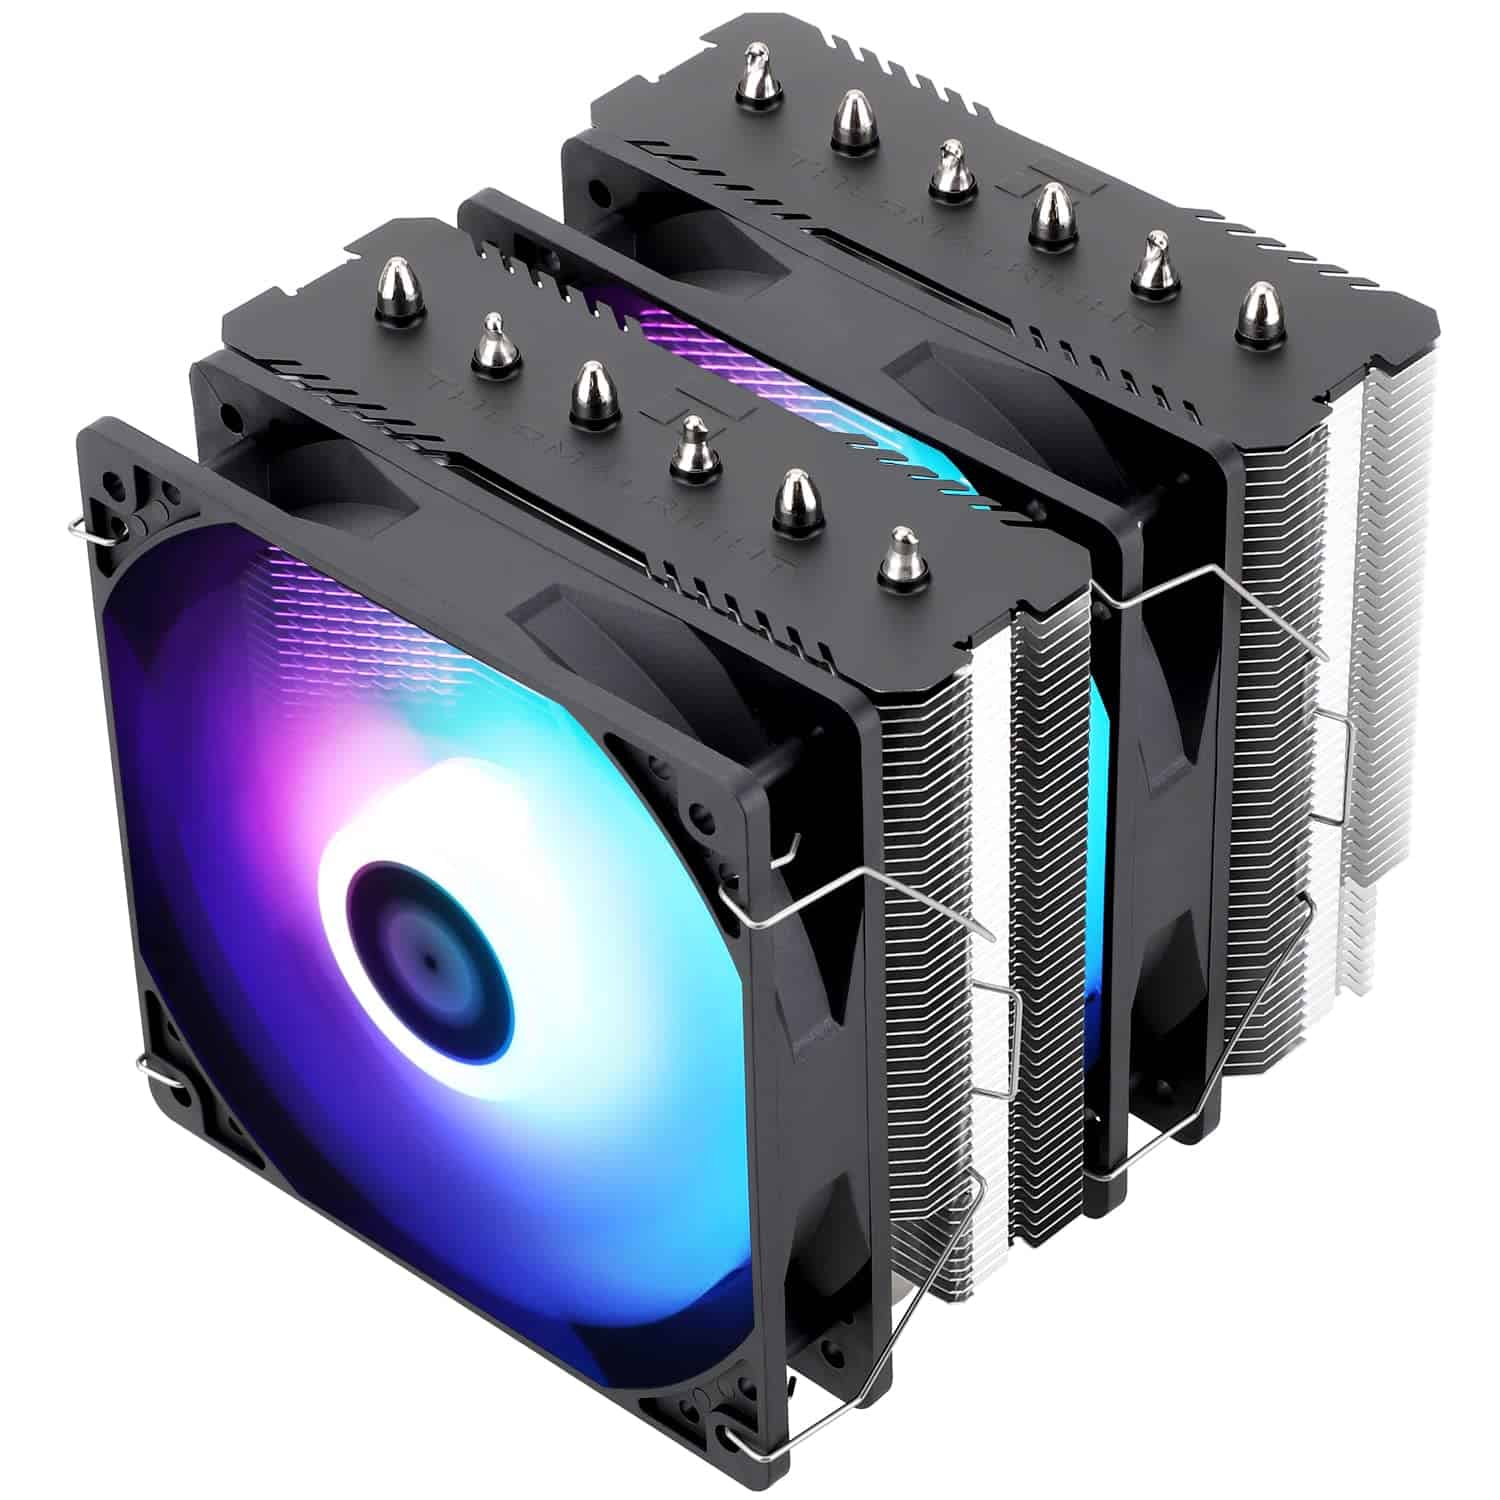 Dual-tower Thermalright Peerless Assassin 120 CPU cooler with rgb fans.